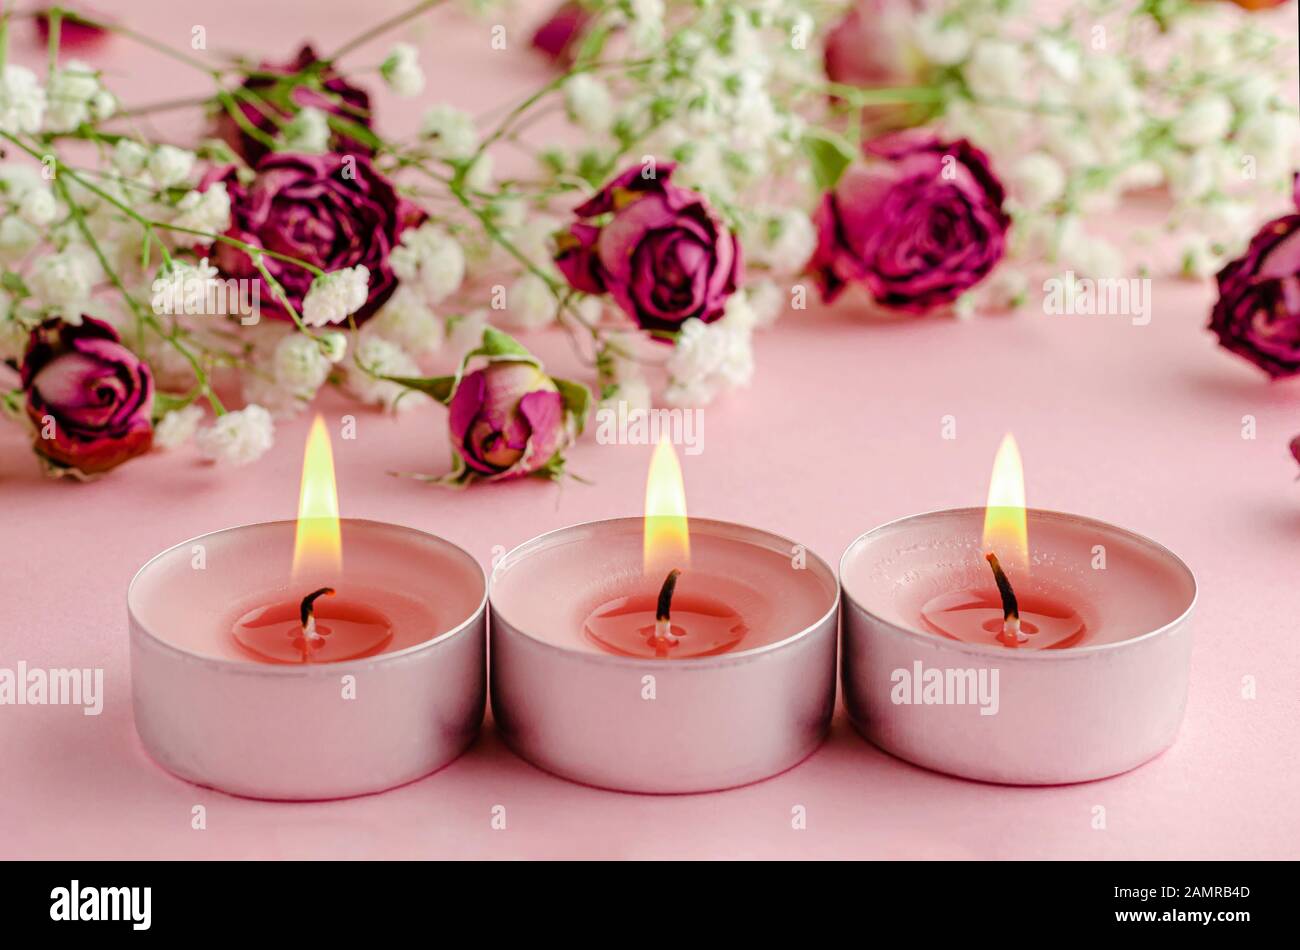 Aromatherapy concept. Three burning candles and dry roses on pink background. Stock Photo